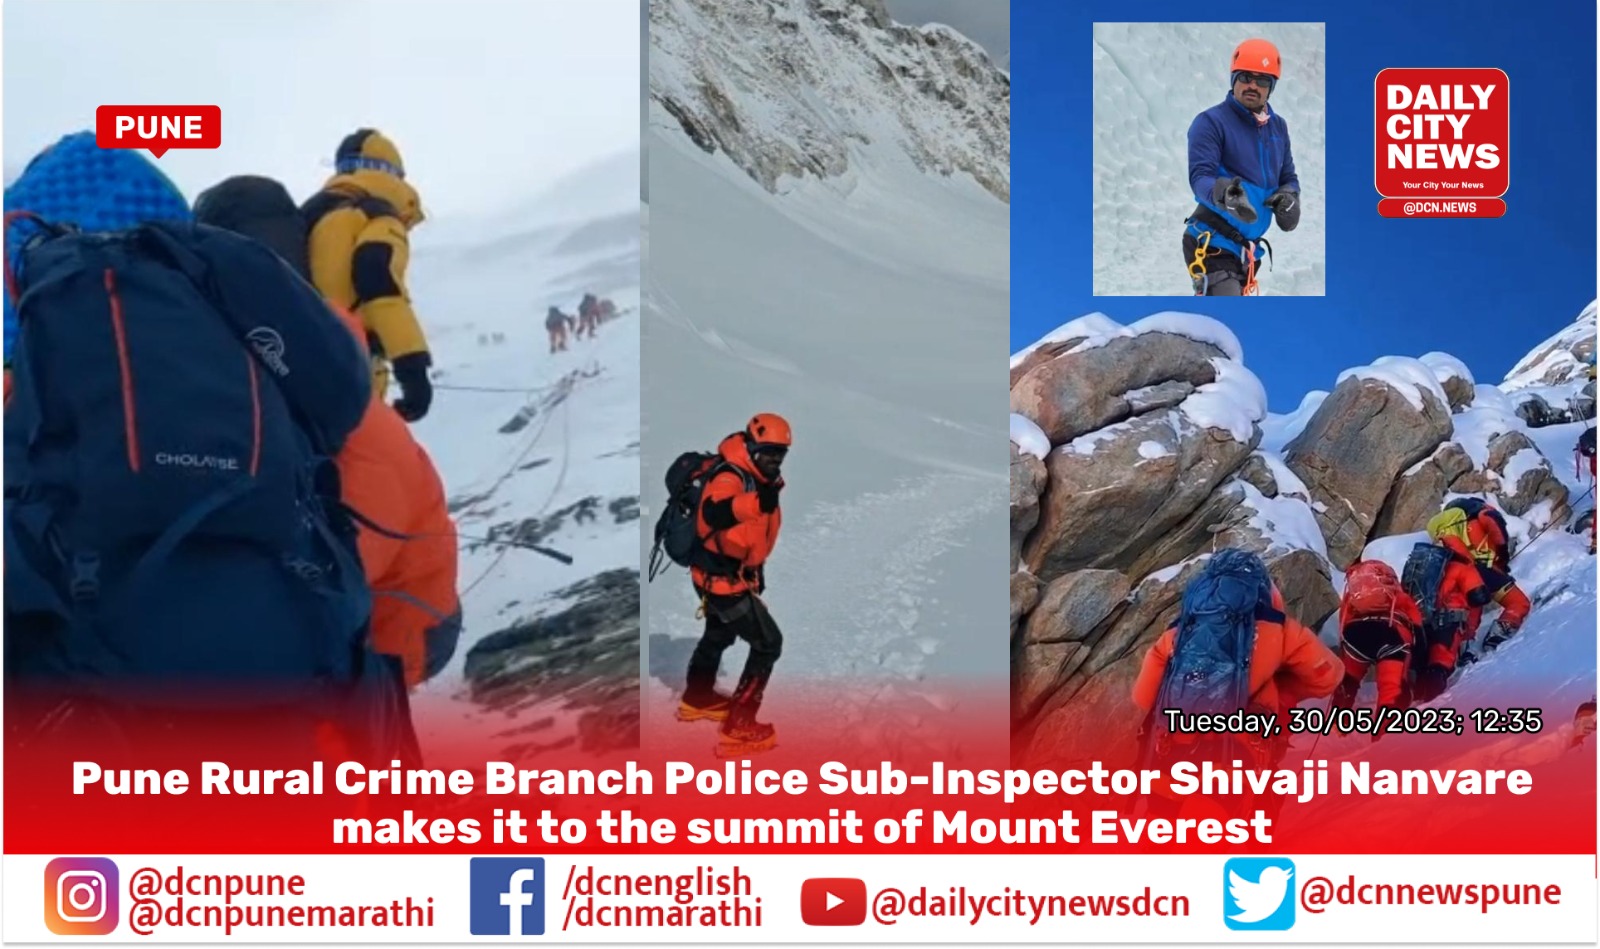 Pune Rural Crime Branch Police Sub-Inspector Shivaji Nanvare makes it to the summit of Mount Everest